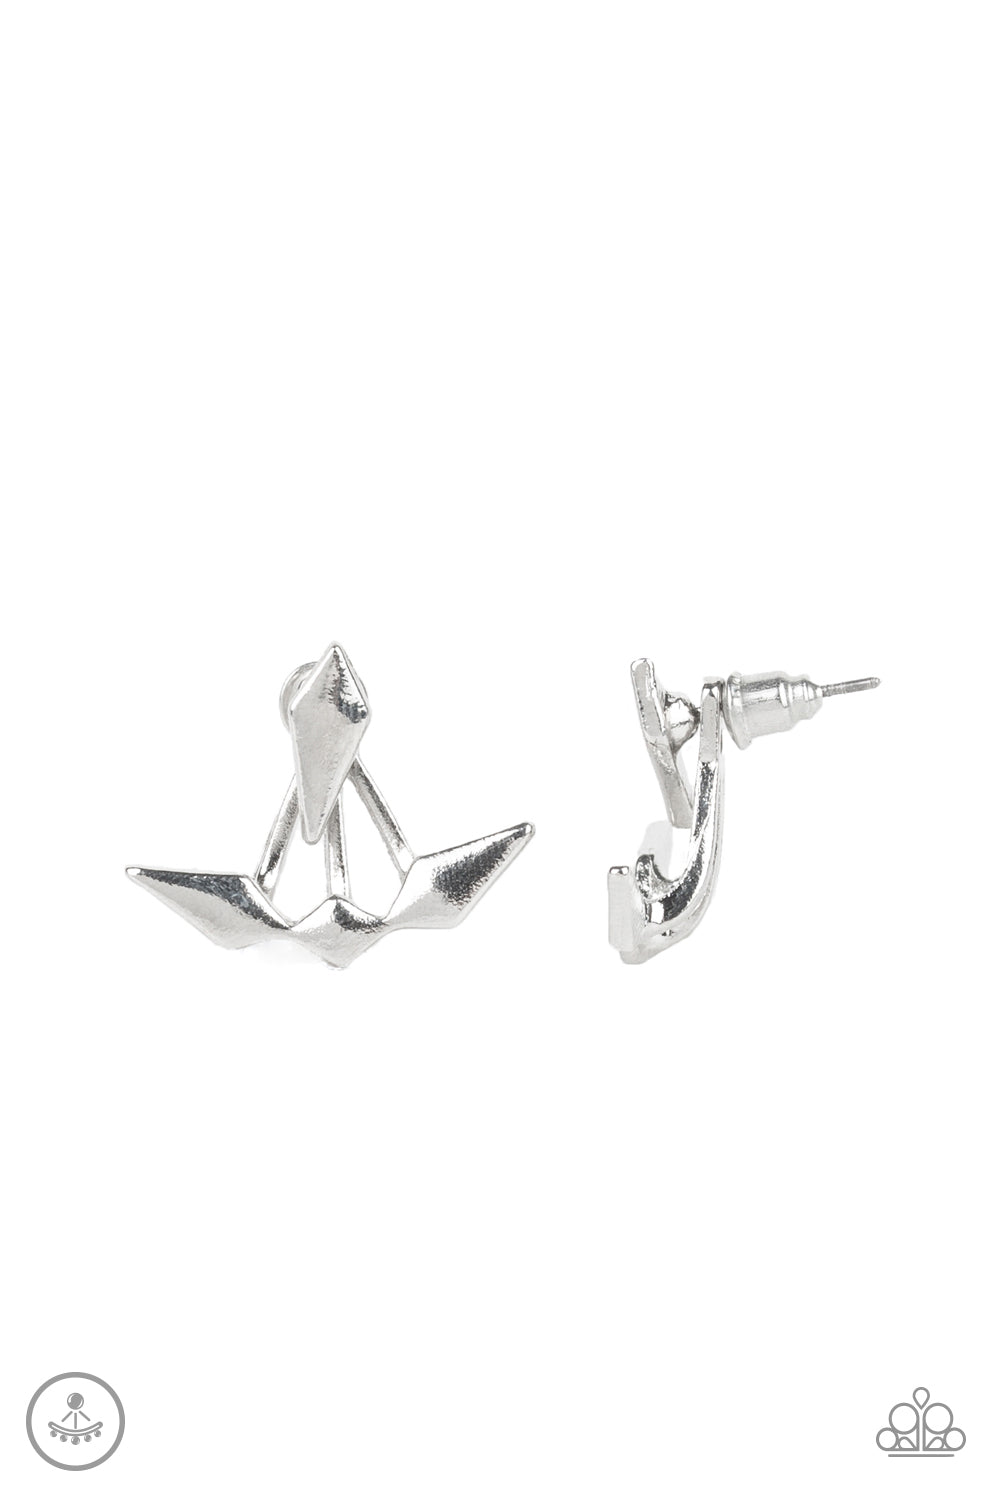 Metal Origami - Silver Double Sided Earrings - Princess Glam Shop